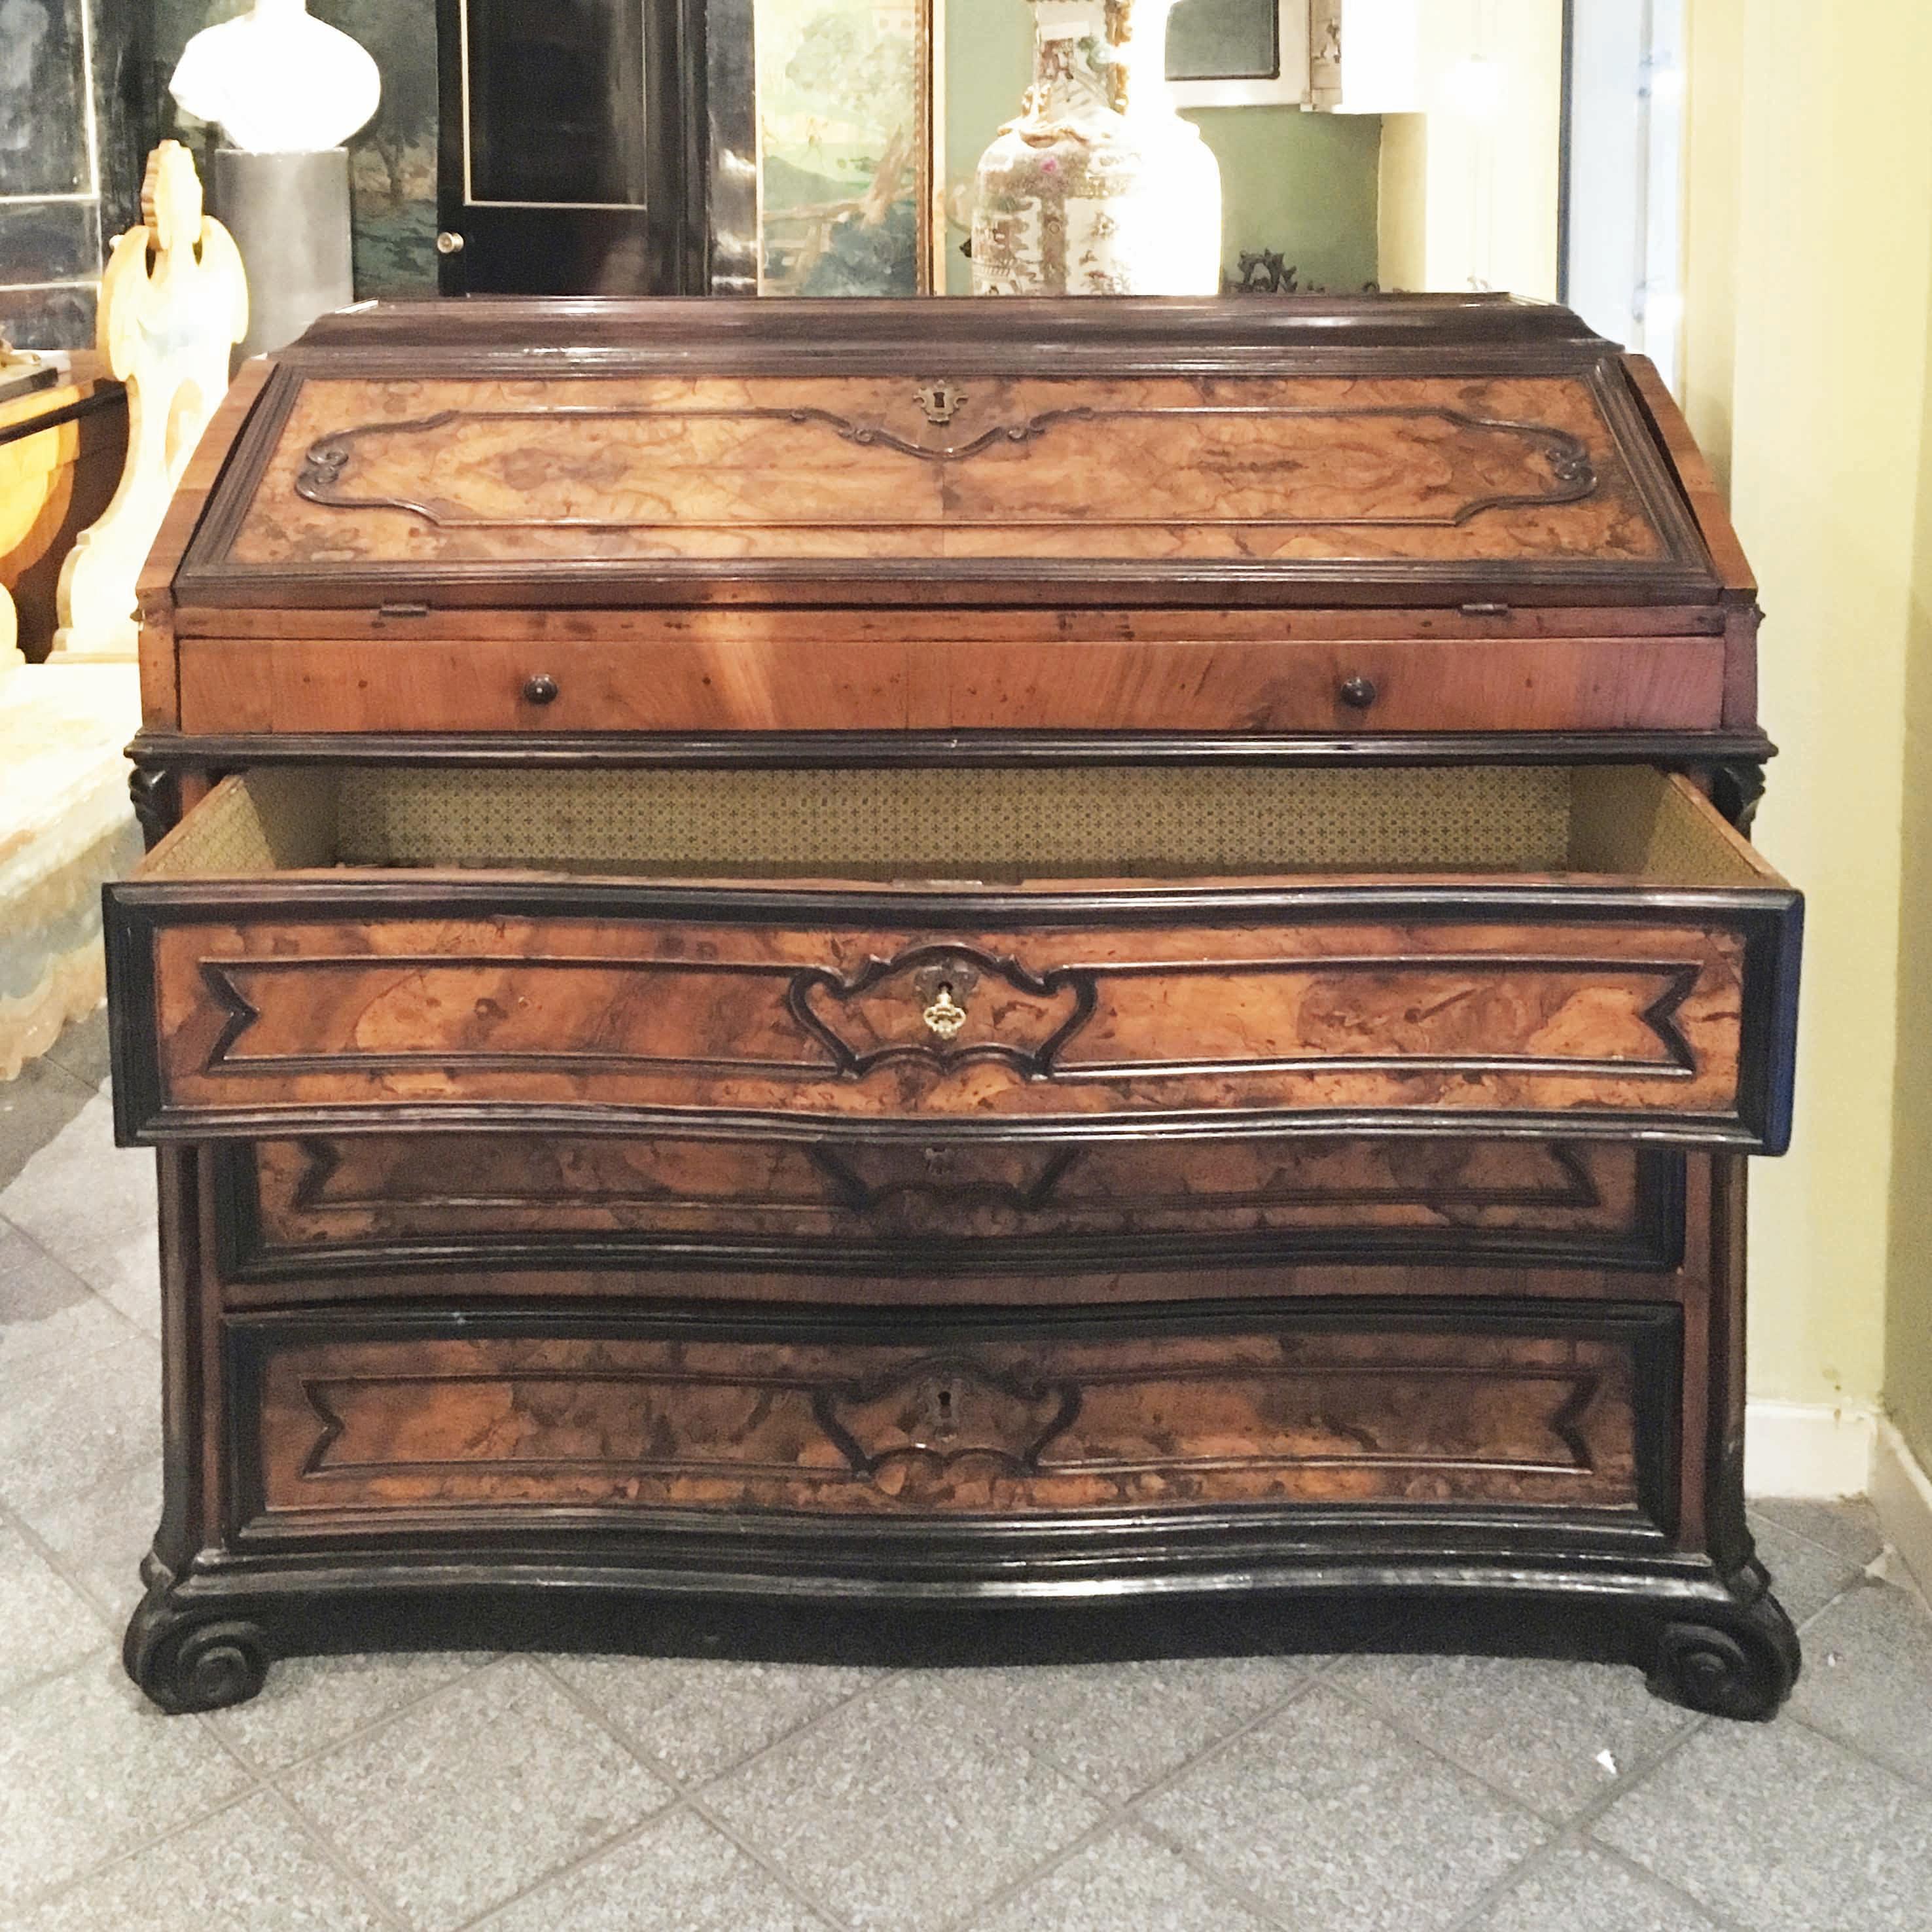 Charming Italian Louis XVI Bureau, secretaire or commode made of walnut root, solid and ebonized walnut wood. The bureau presents a fall front with writing surface and interior drawers above three large and one smaller drawer.
Italy, Lombardy, 18th